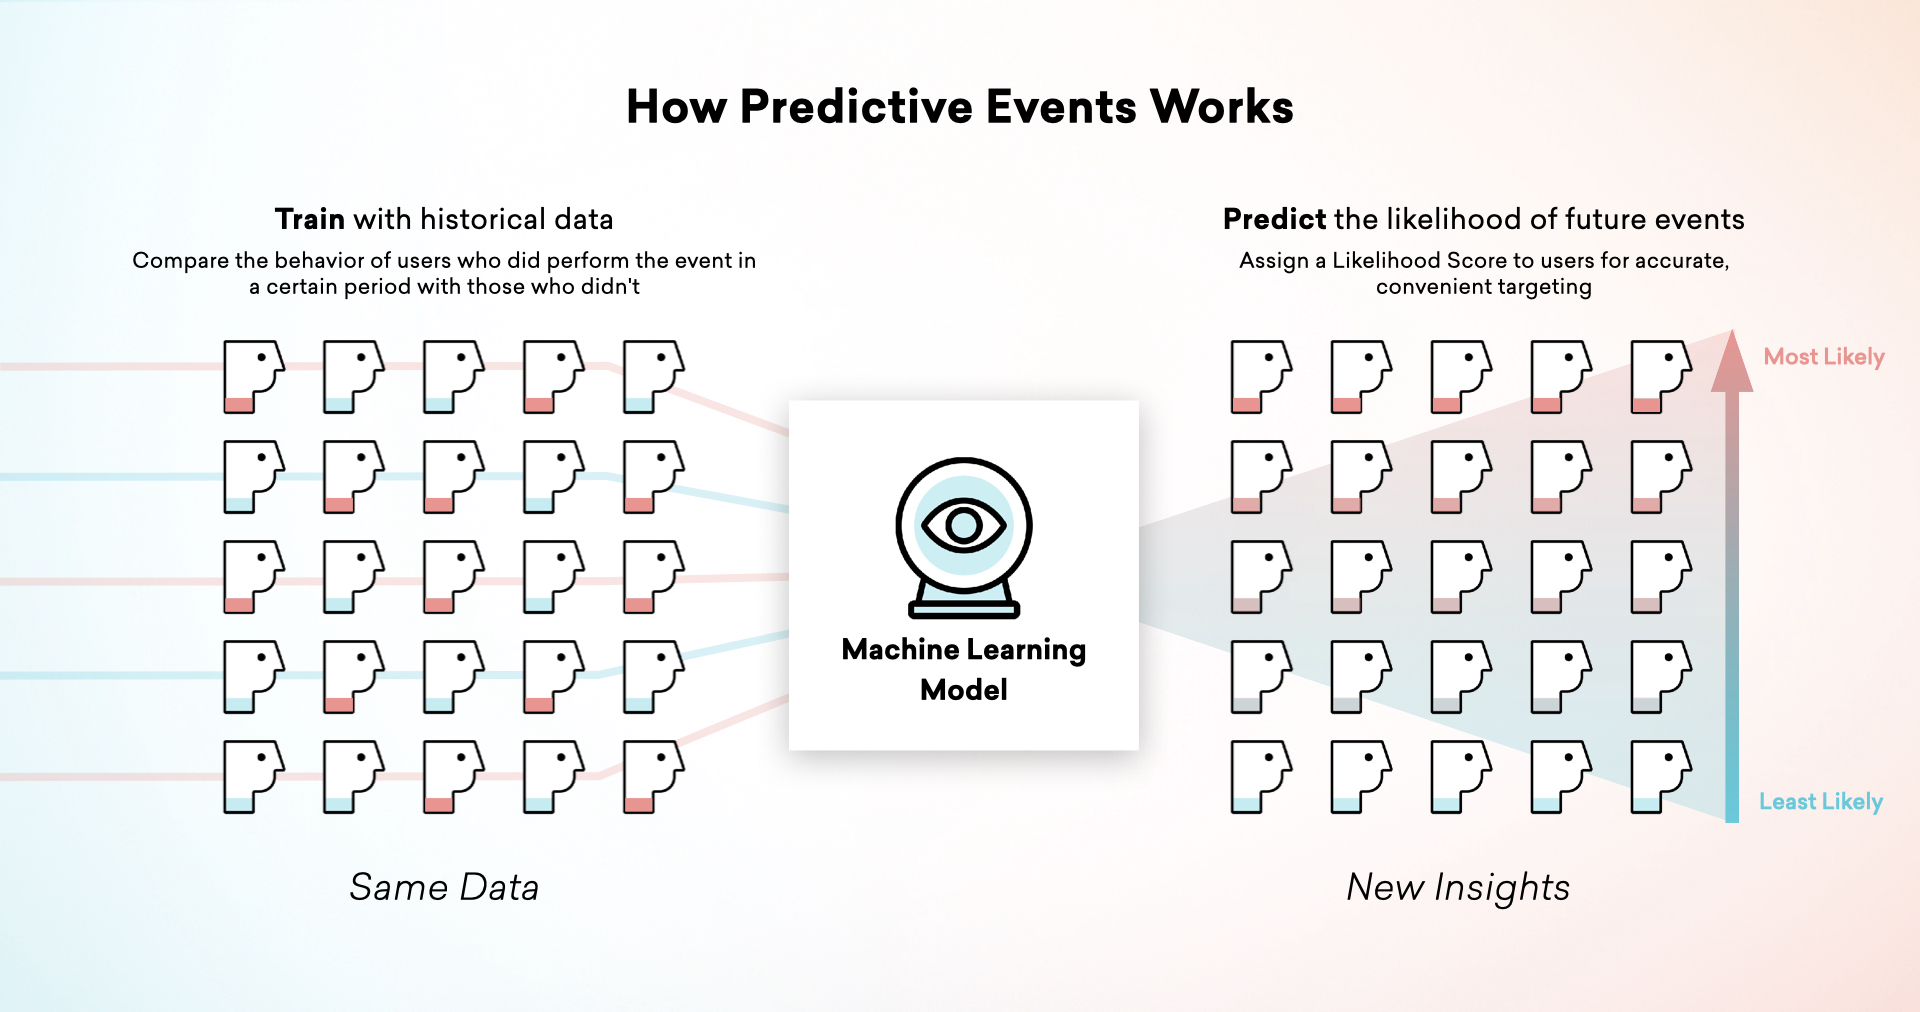 Graphic titled "How Predictive Events Works". On the left shows user data being funneled into the machine learning model. The label reads "Train with historical data, compare the behavior of users who did perform the event in a certain period with those who didn't." On the right shows the results of the machine learning, where users are ranked by least likely to most likely to perform the event. The label reads "Predict likelihood of future events, assign a Likelihood Score to users for accurate, convenient targeting."